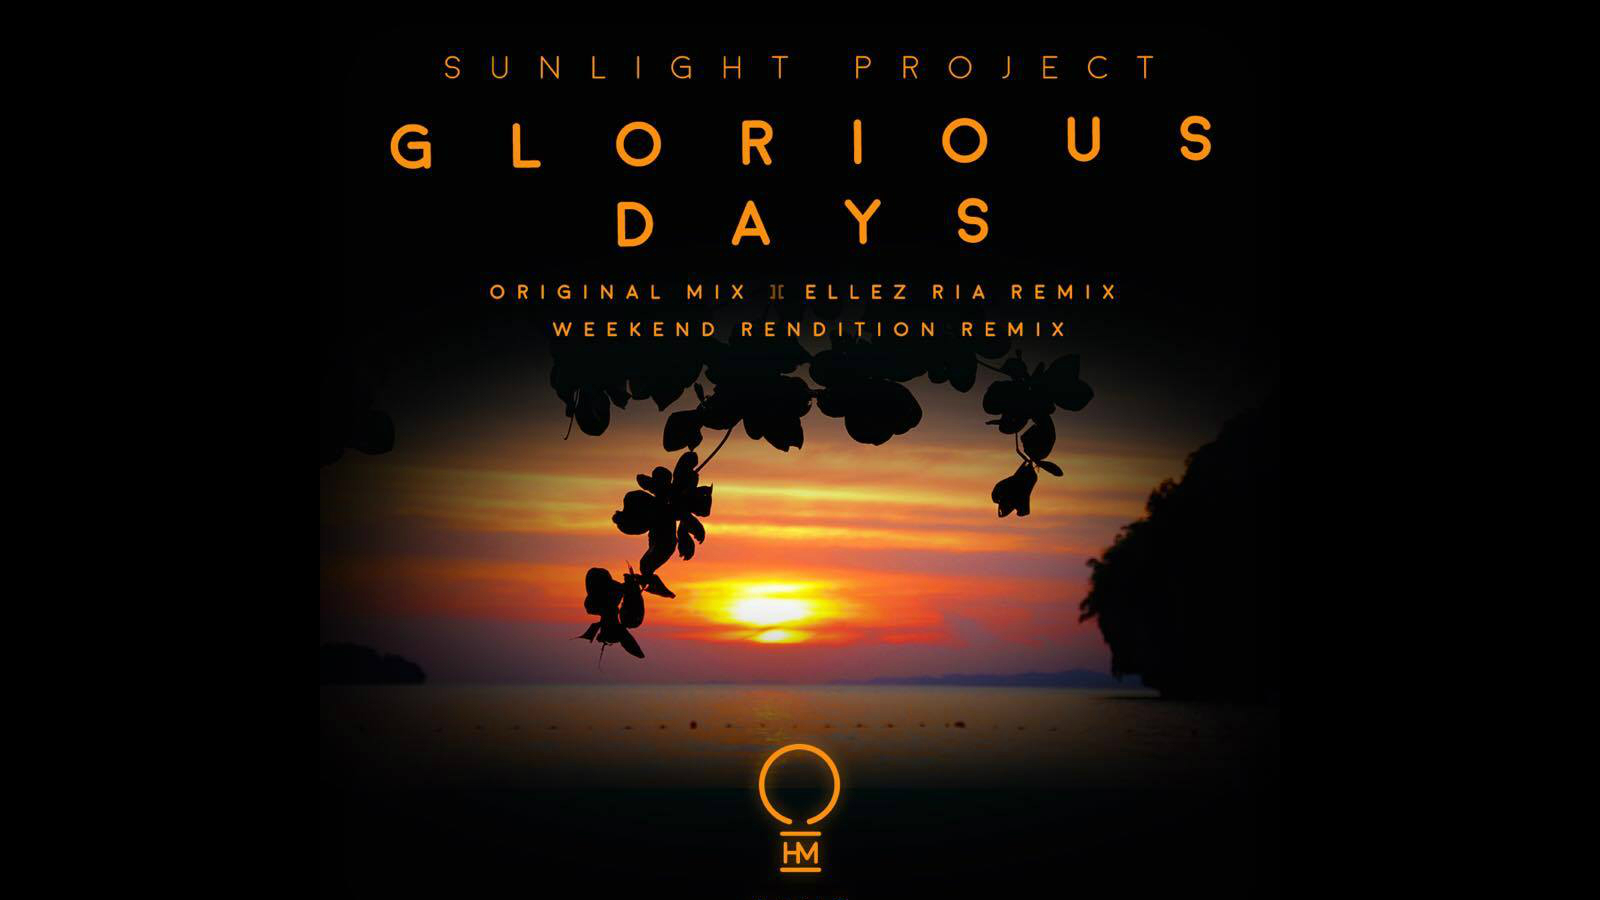 Sunlight Project Glorious Days